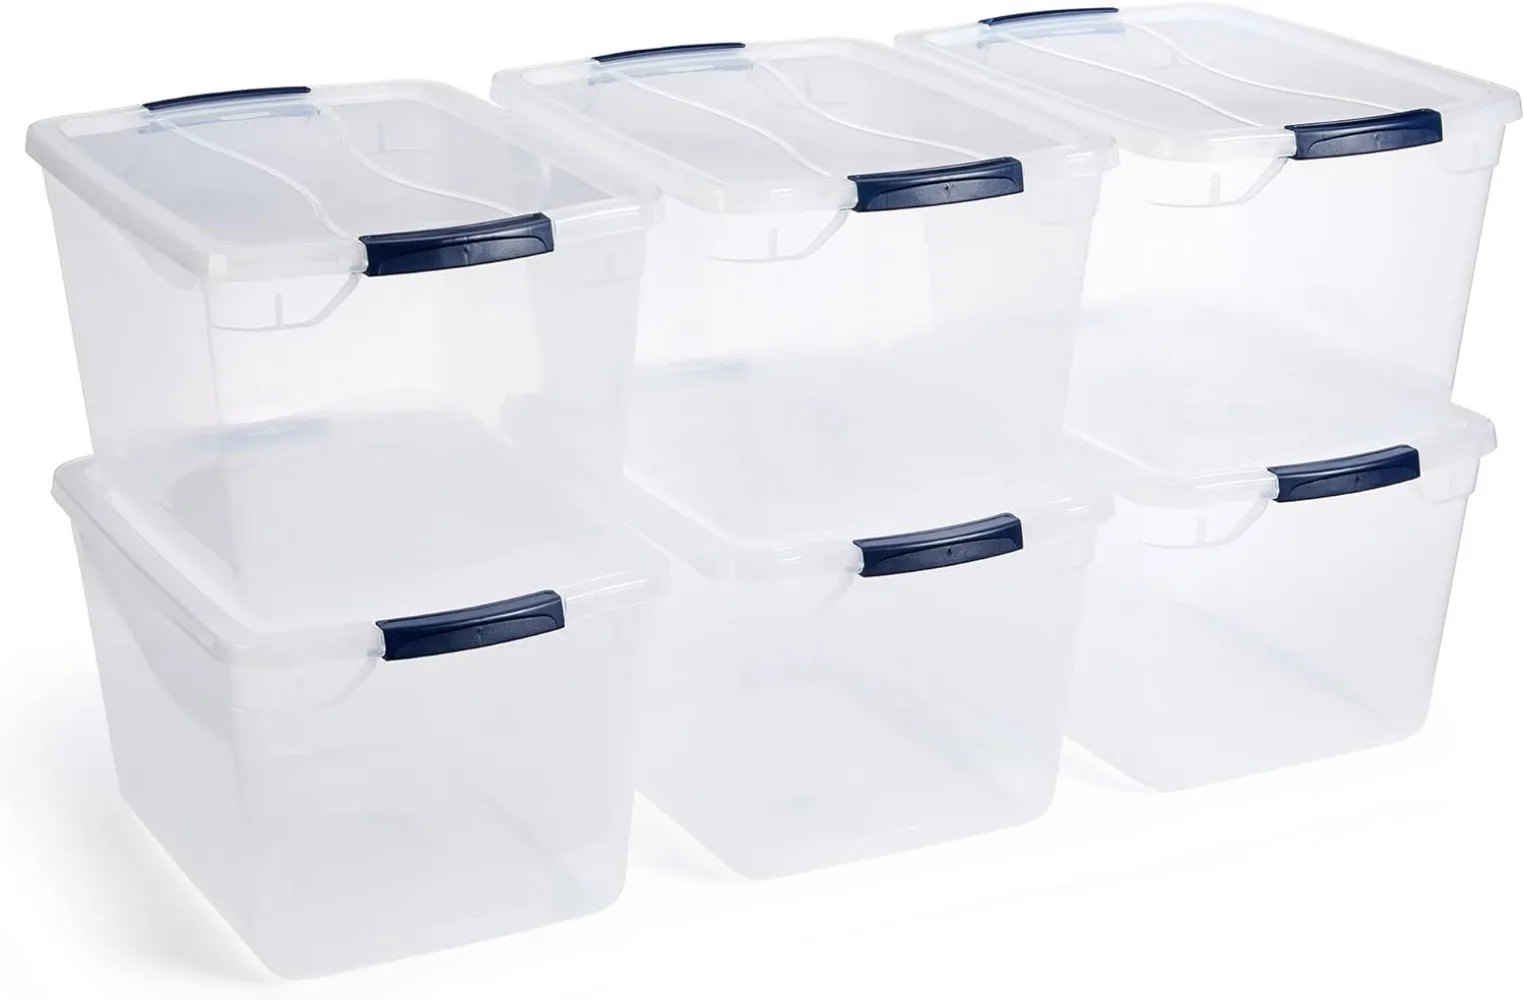 

Rubbermaid Cleverstore 30 Quart Latching Stackable Plastic Storage Bins Tote Container with Lid for Work and Home Organization,